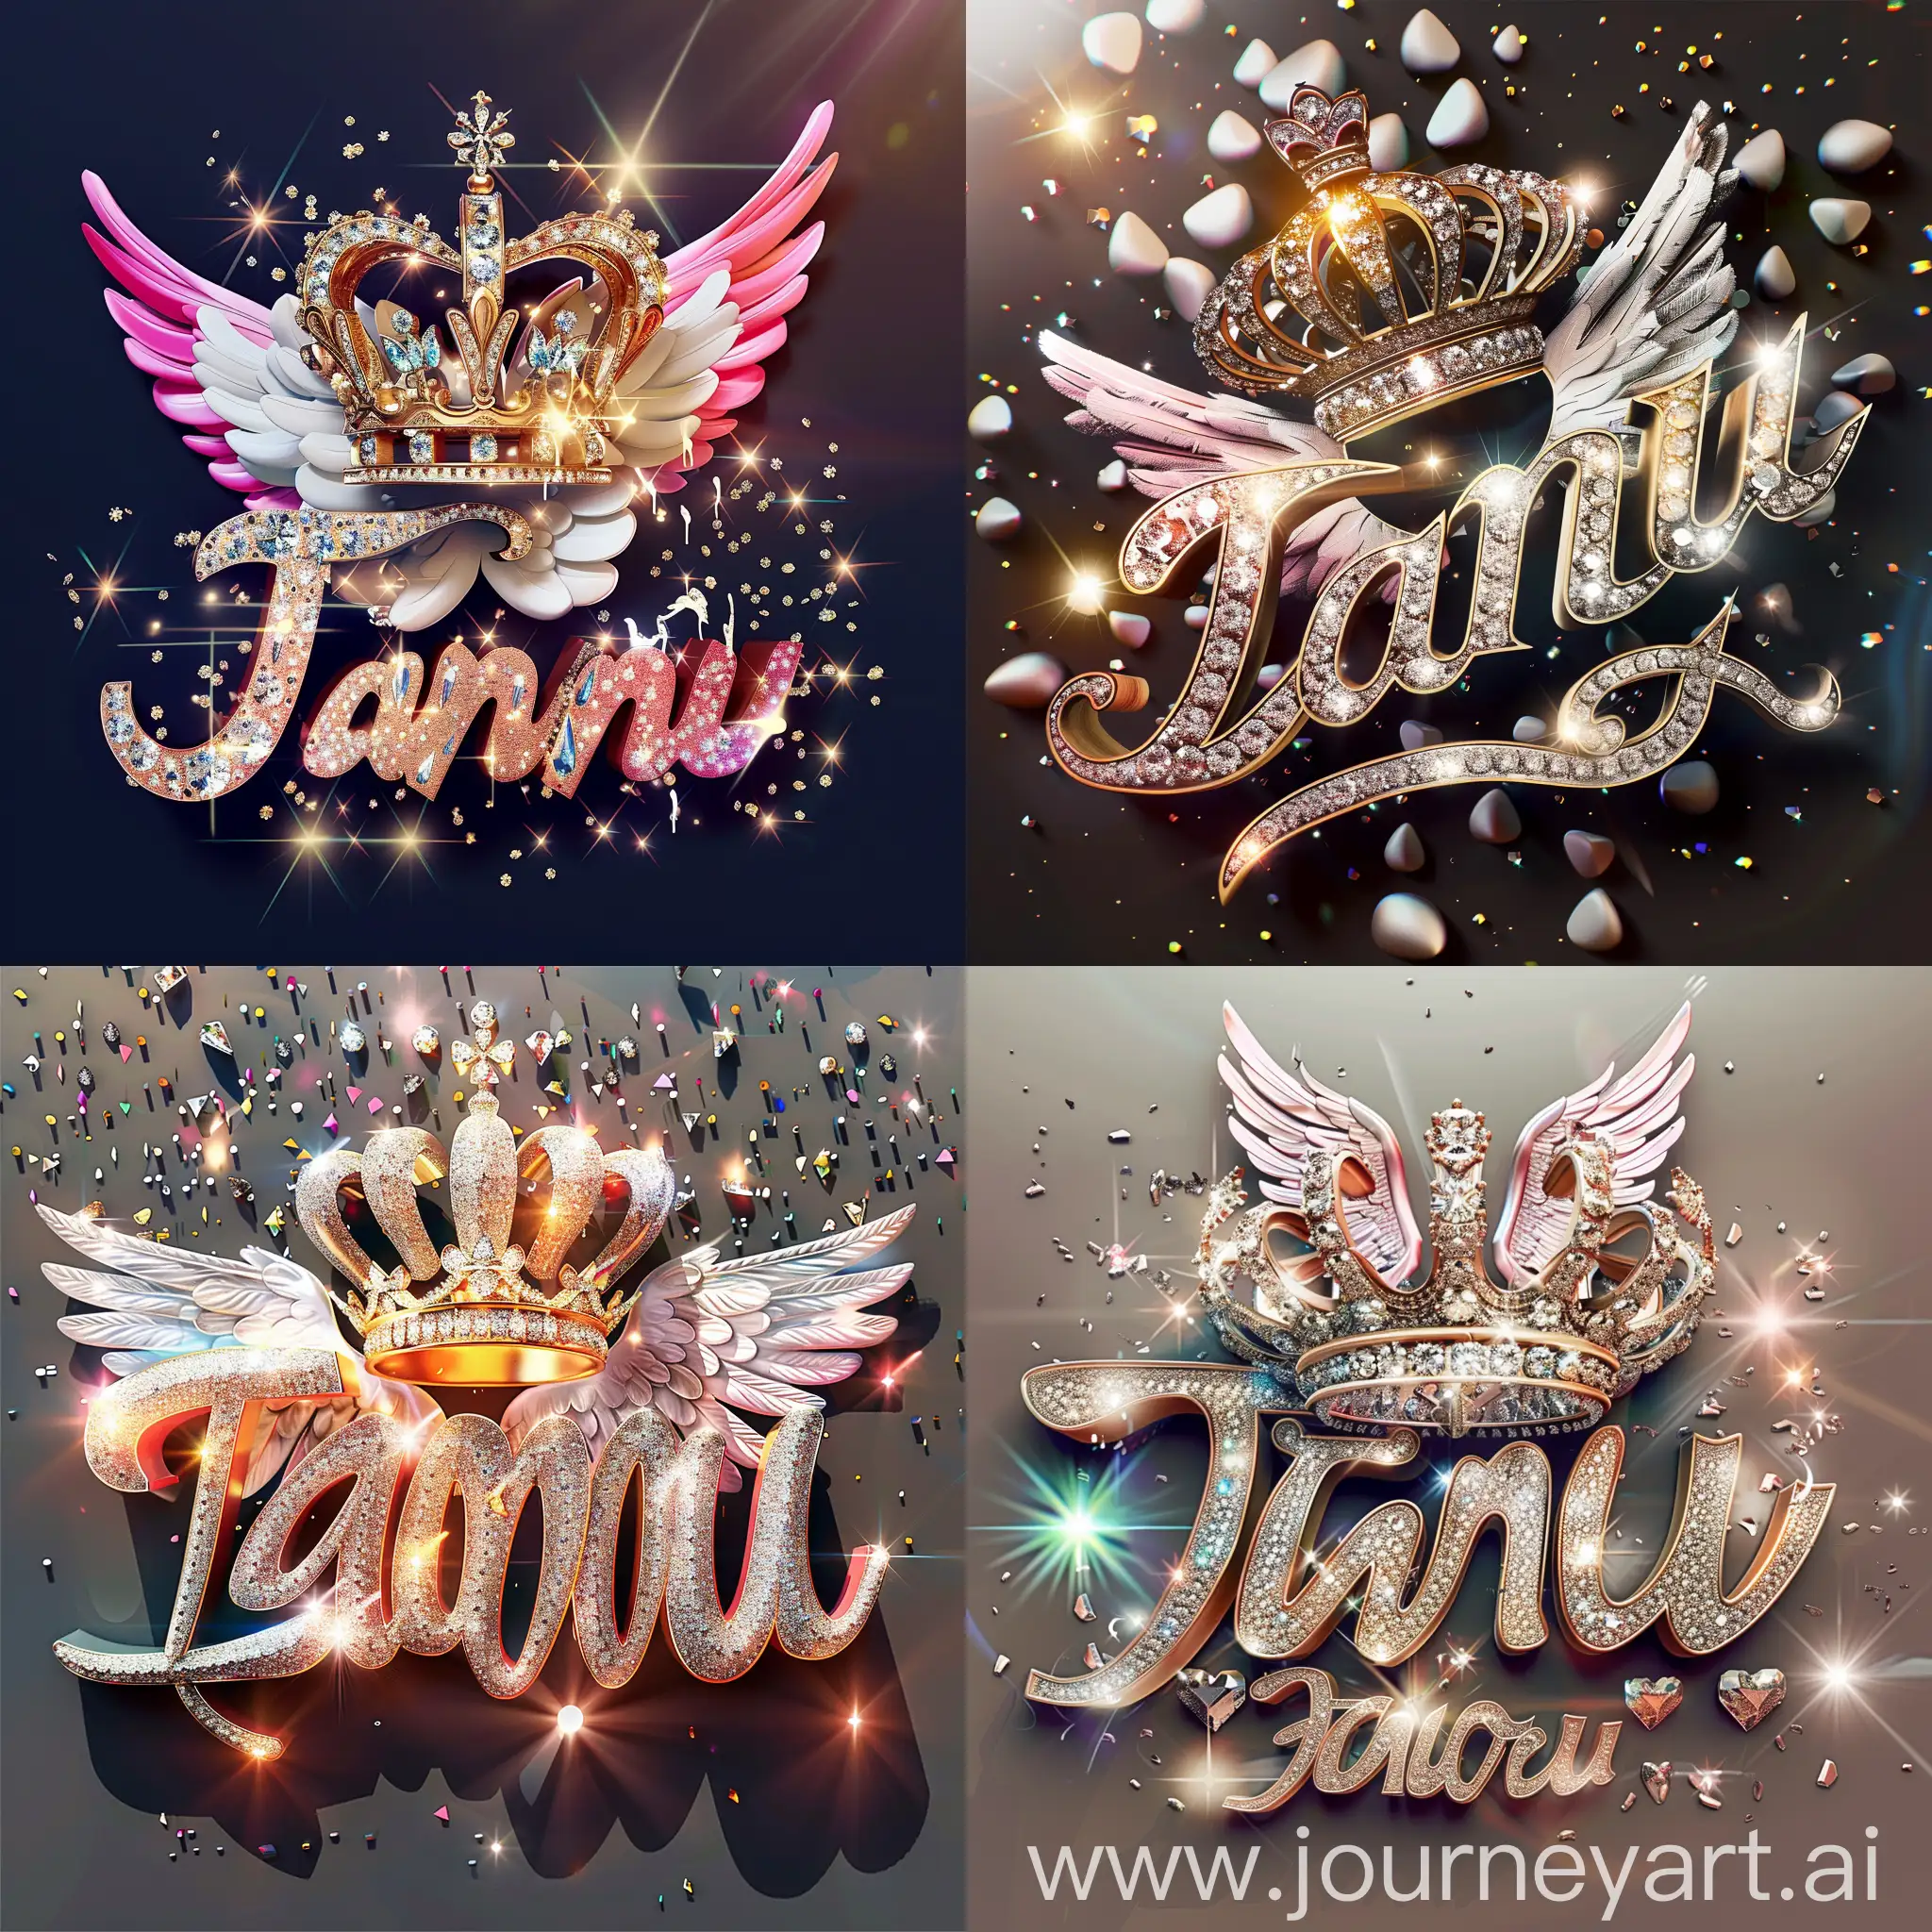 Elegant-3D-Typography-with-Name-Tanu-Featuring-Crown-Diamonds-and-Angel-Wings